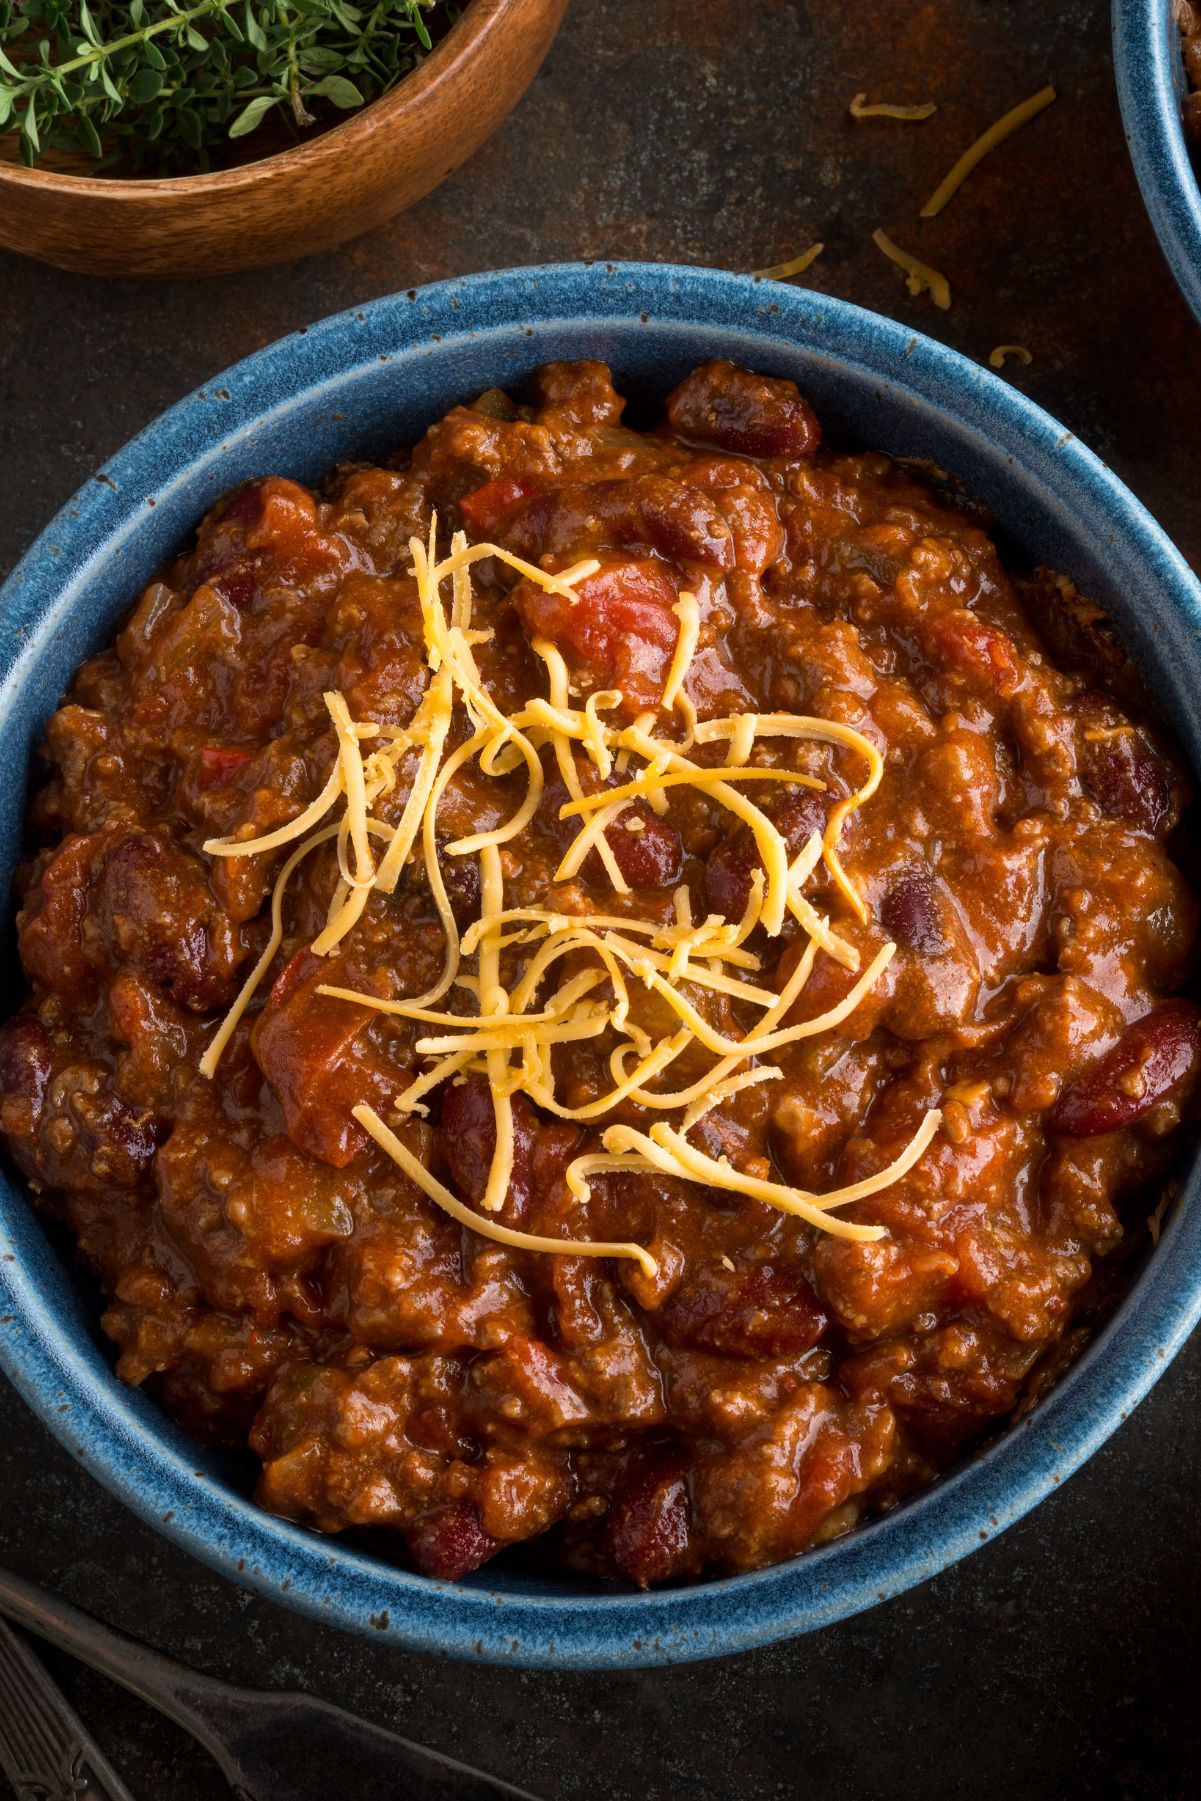 Close-up of a bowl of rich and thick chili garnished with shredded cheese, in a blue bowl against a dark, textured background.